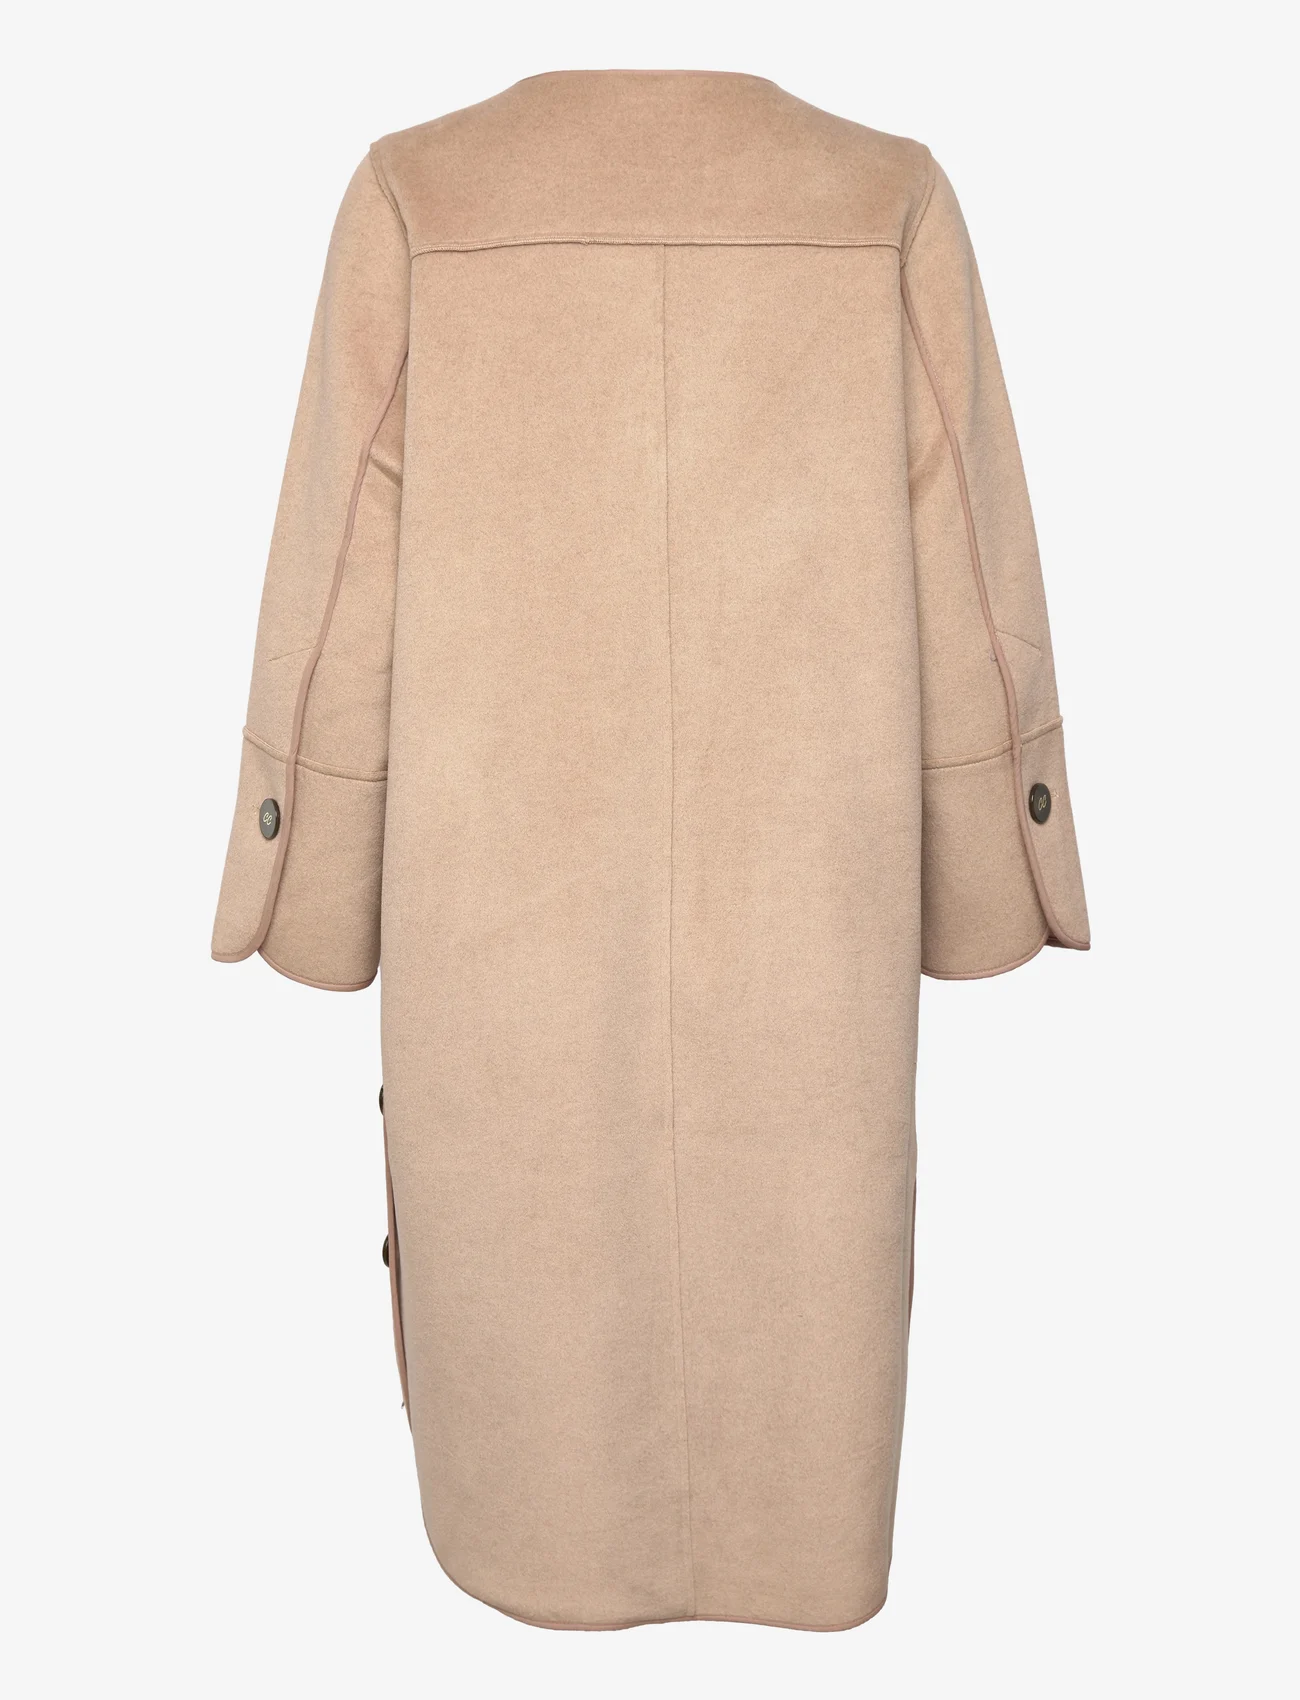 Coster Copenhagen - Coat with button detail - sand brown - 1